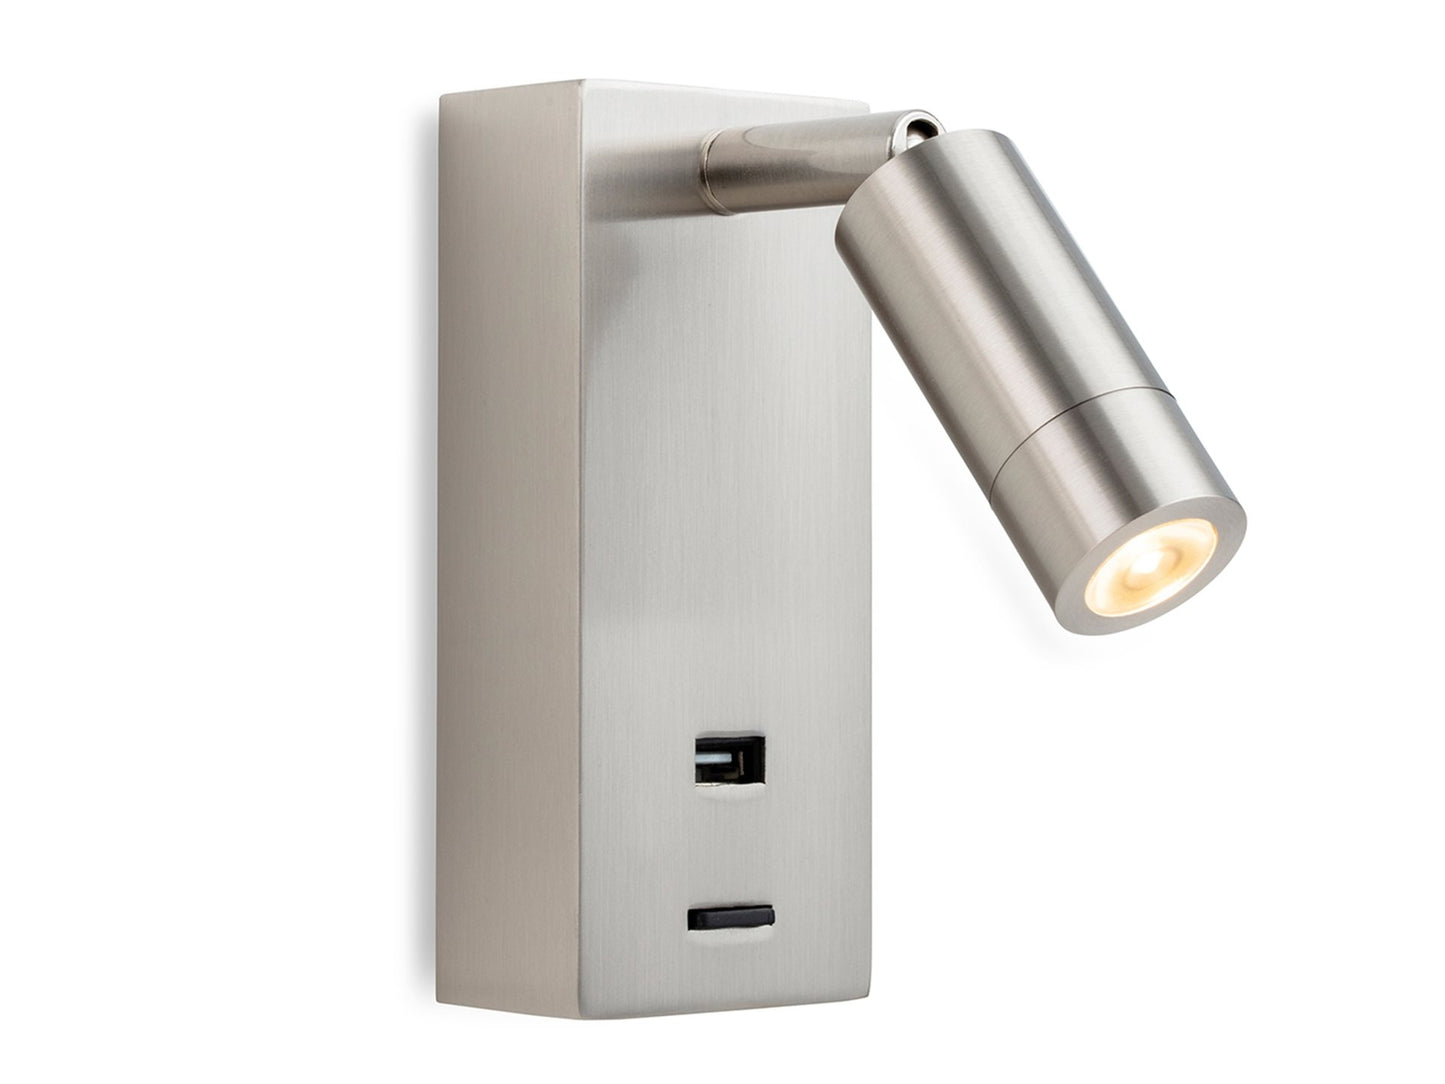 Clifton LED Wall Light with USB PortBrushed Steel